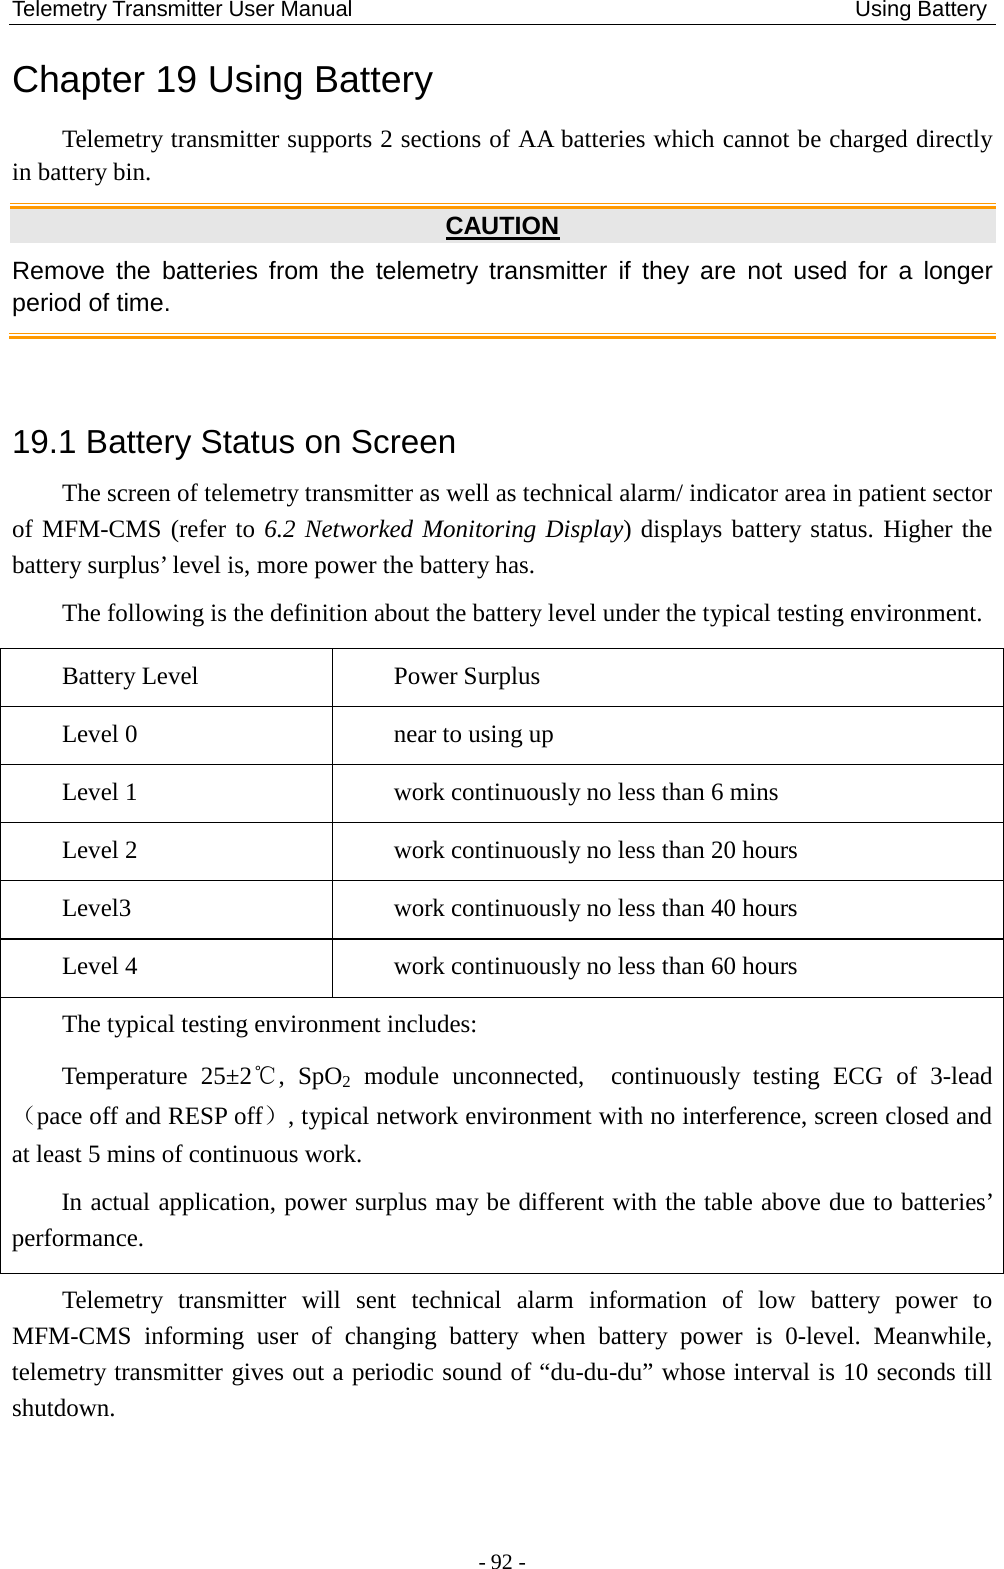 Telemetry Transmitter User Manual                                              Using Battery Chapter 19 Using Battery Telemetry transmitter supports 2 sections of AA batteries which cannot be charged directly in battery bin.  CAUTION Remove the batteries from the telemetry transmitter if they are not used for a longer period of time.  19.1 Battery Status on Screen The screen of telemetry transmitter as well as technical alarm/ indicator area in patient sector of MFM-CMS (refer to 6.2 Networked Monitoring Display) displays battery status. Higher the battery surplus’ level is, more power the battery has.   The following is the definition about the battery level under the typical testing environment. Battery Level  Power Surplus Level 0  near to using up Level 1  work continuously no less than 6 mins Level 2  work continuously no less than 20 hours Level3  work continuously no less than 40 hours Level 4  work continuously no less than 60 hours The typical testing environment includes: Temperature 25±2℃, SpO2  module  unconnected,  continuously testing ECG of 3-lead（pace off and RESP off）, typical network environment with no interference, screen closed and at least 5 mins of continuous work.   In actual application, power surplus may be different with the table above due to batteries’ performance. Telemetry transmitter will sent technical alarm information of low battery power to MFM-CMS informing user of changing battery when battery power is 0-level. Meanwhile, telemetry transmitter gives out a periodic sound of “du-du-du” whose interval is 10 seconds till shutdown.  - 92 - 